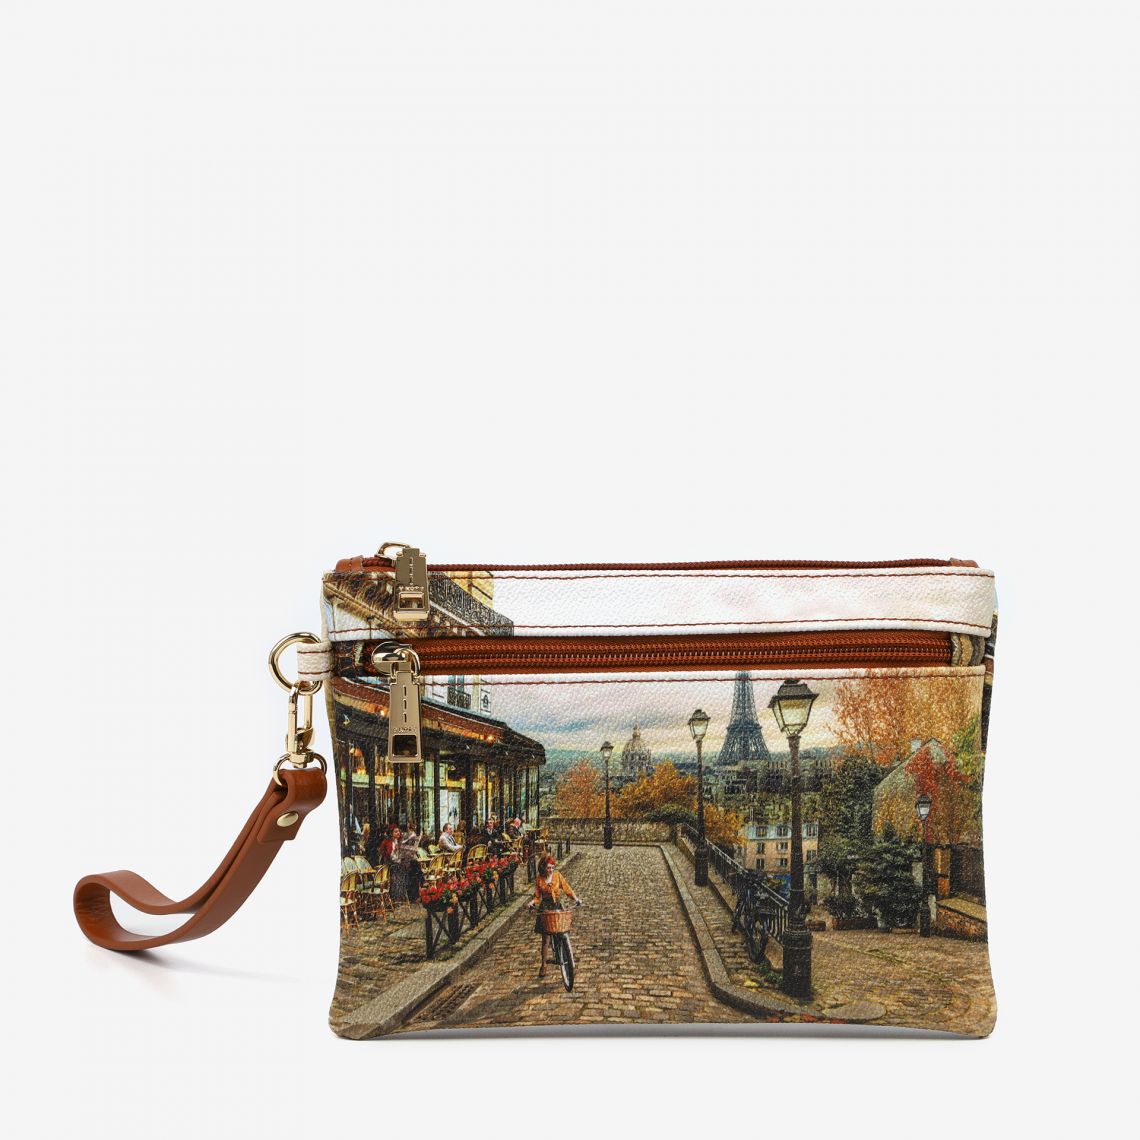 Black Friday Pocket With Handle Small Romantic Paris borse outlet online